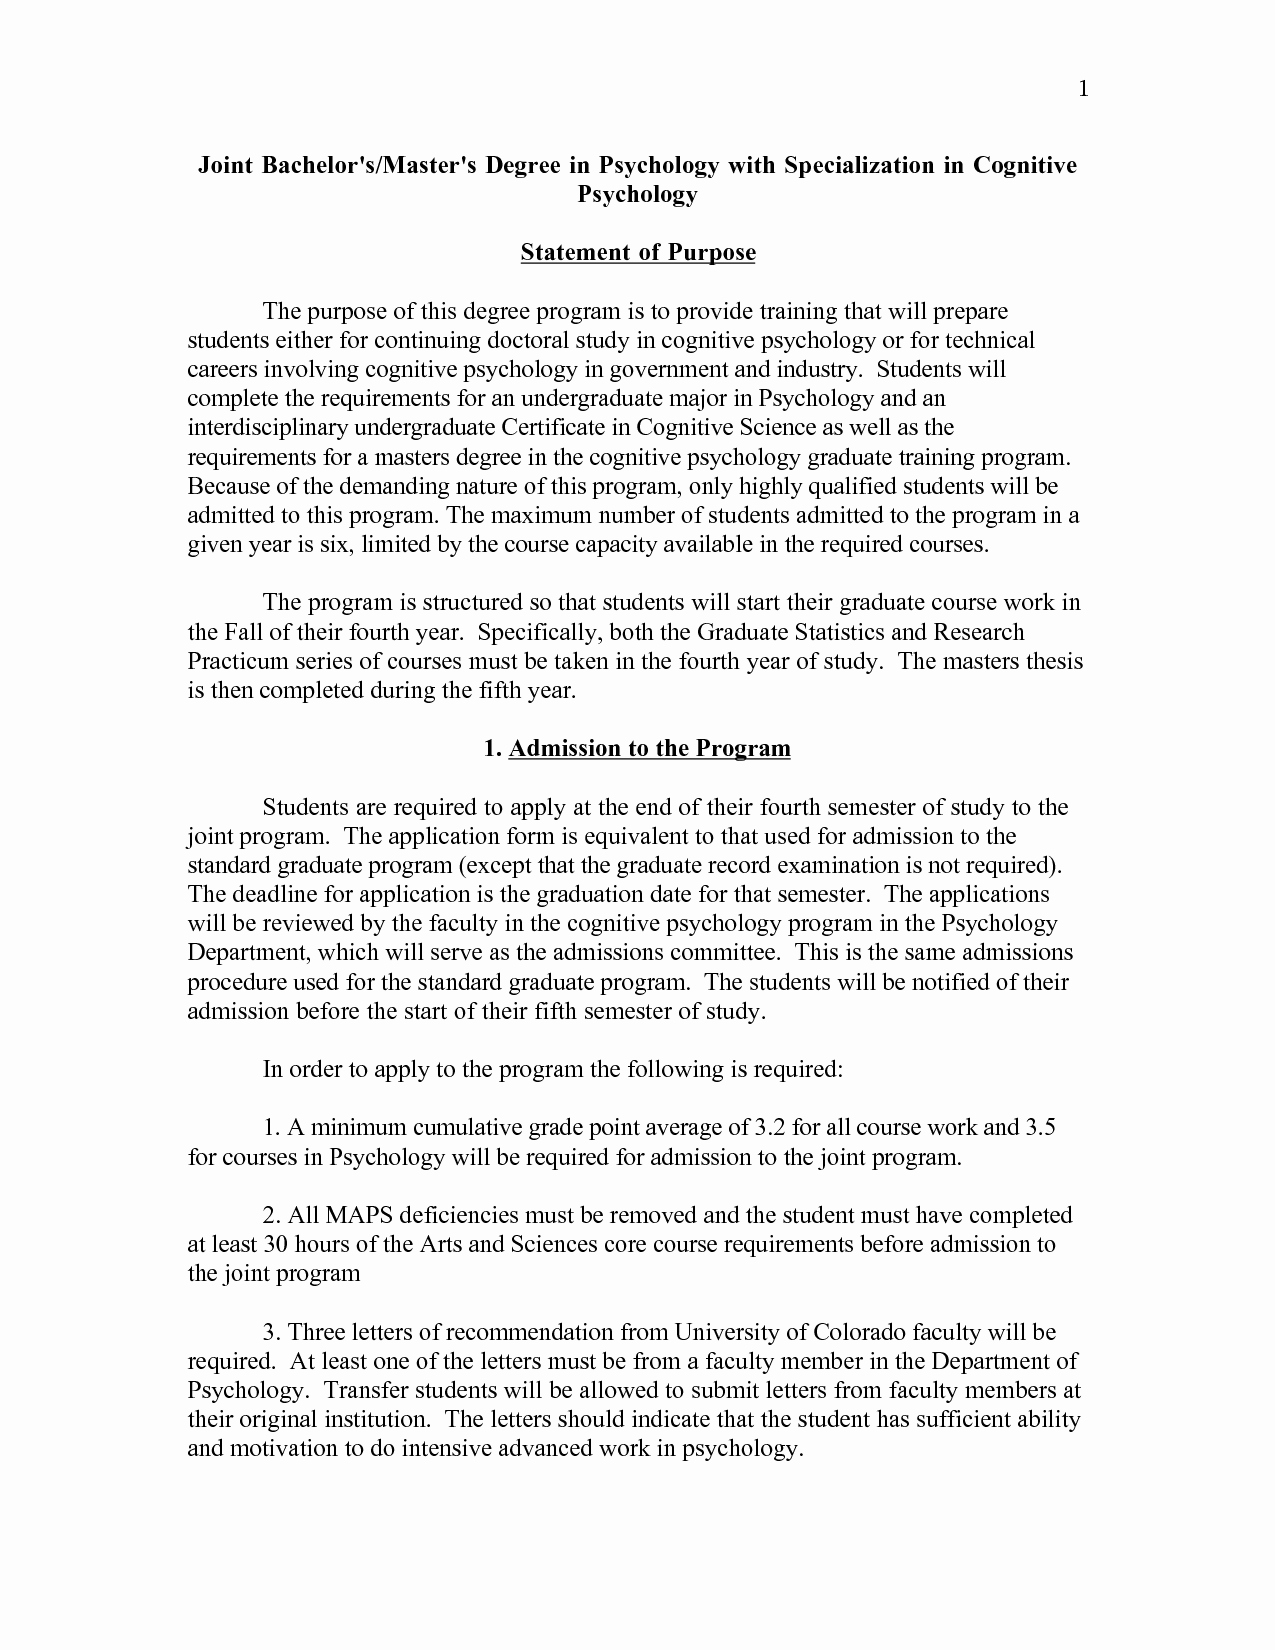 Master Degree Essay Examples Lovely High School Essay Examples How to Find A Quality E